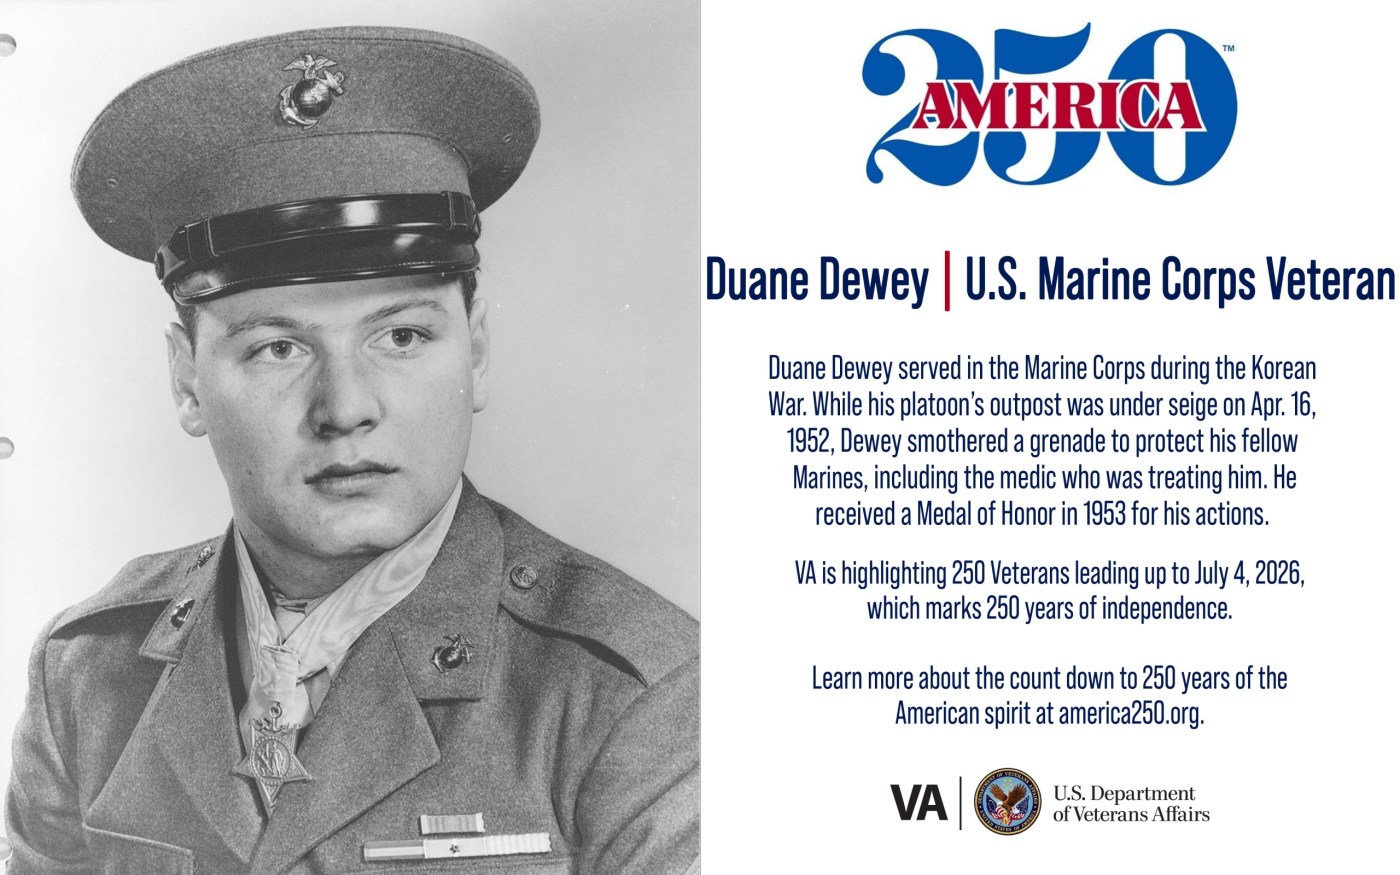 This week’s America250 salute is Marine Veteran Duane Dewey, who received a Medal of Honor for shielding his platoon from a grenade in Korea.